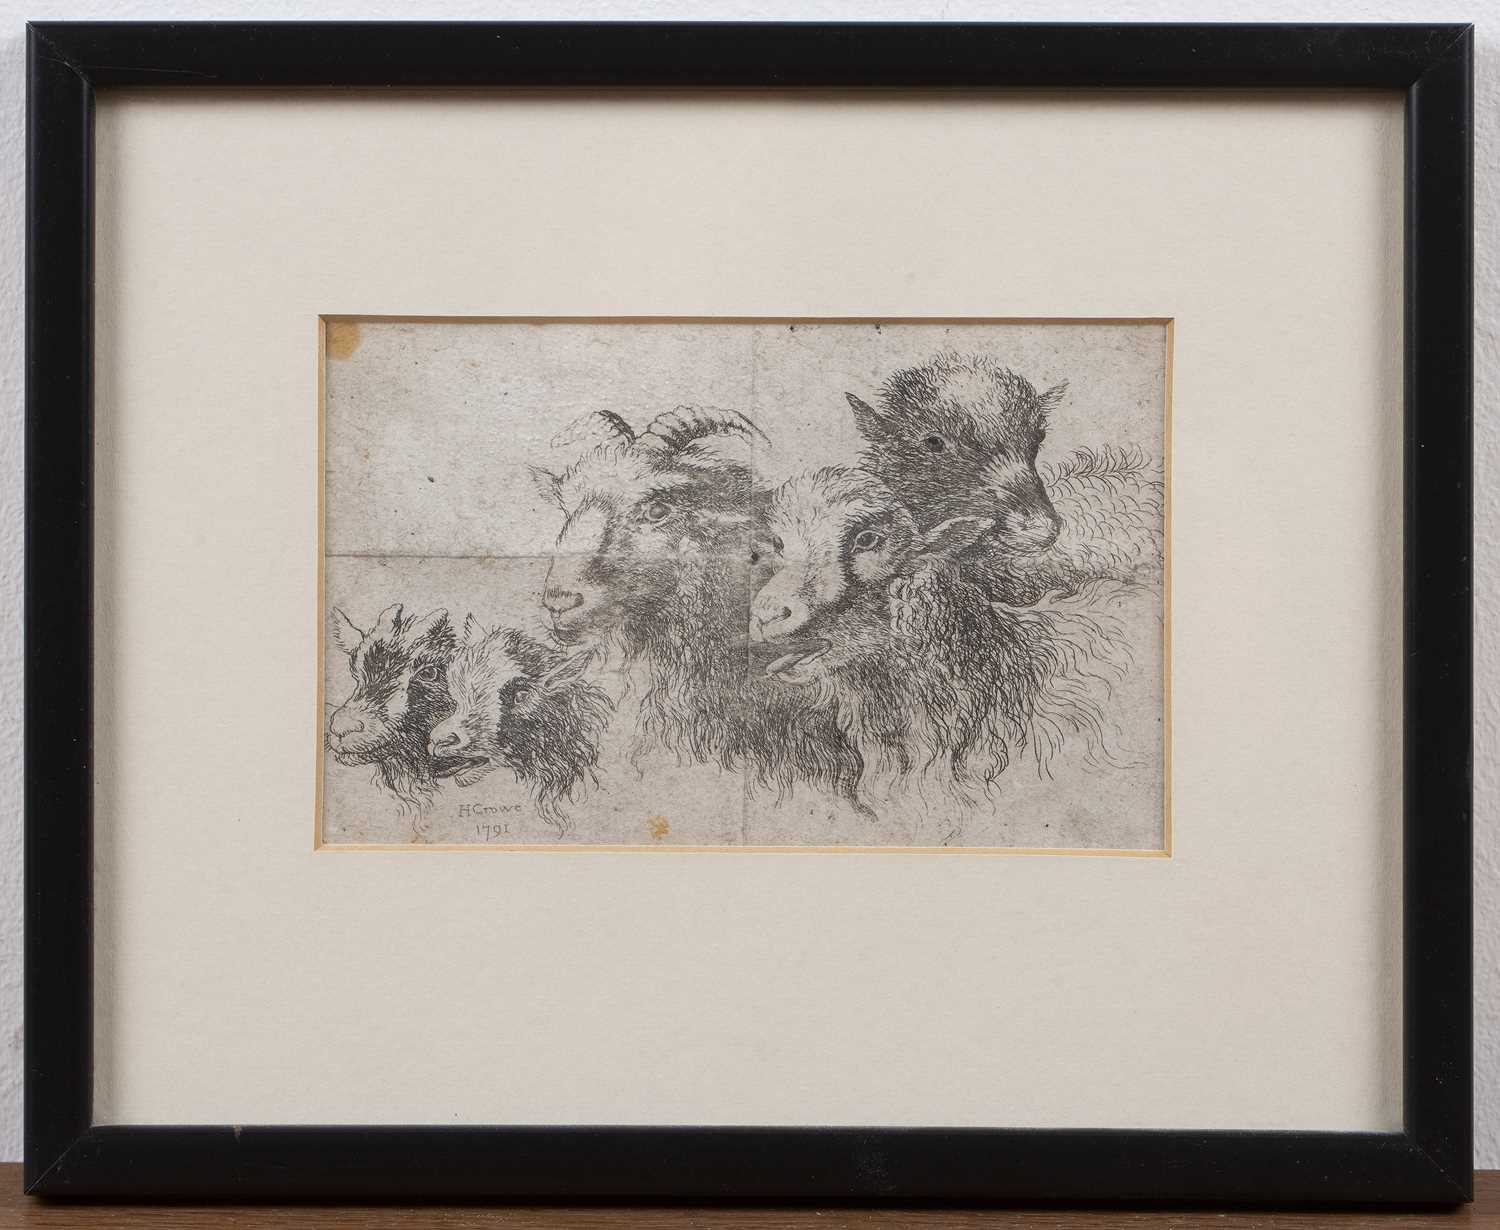 H. Crowe (18th Century English School) 'Untitled study of goats', etching, with printed signature - Image 2 of 3